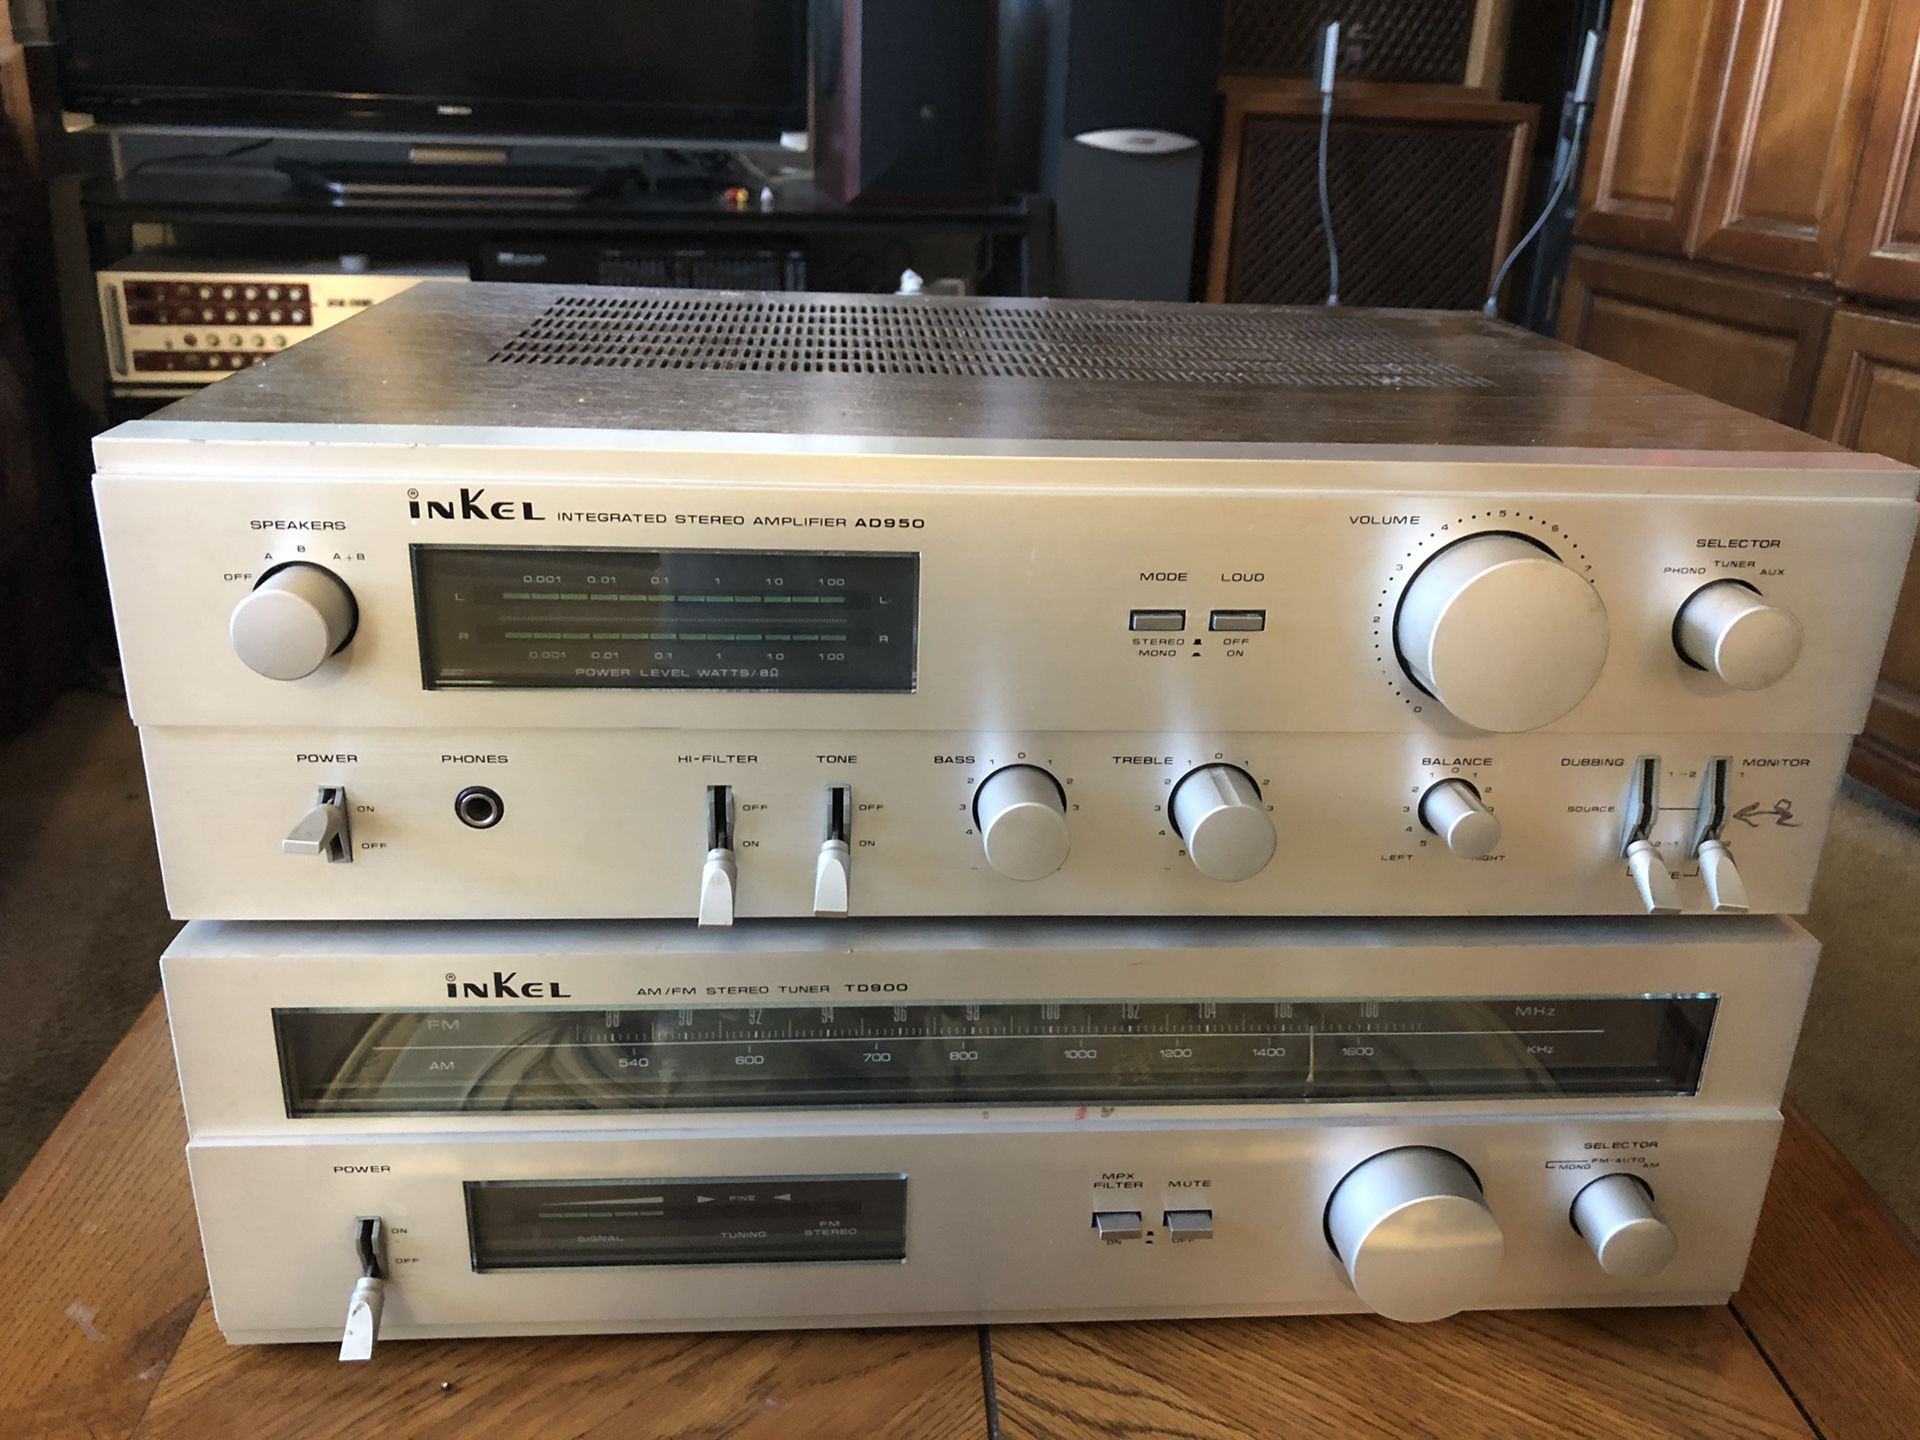 Inkel receiver and stereo tuner